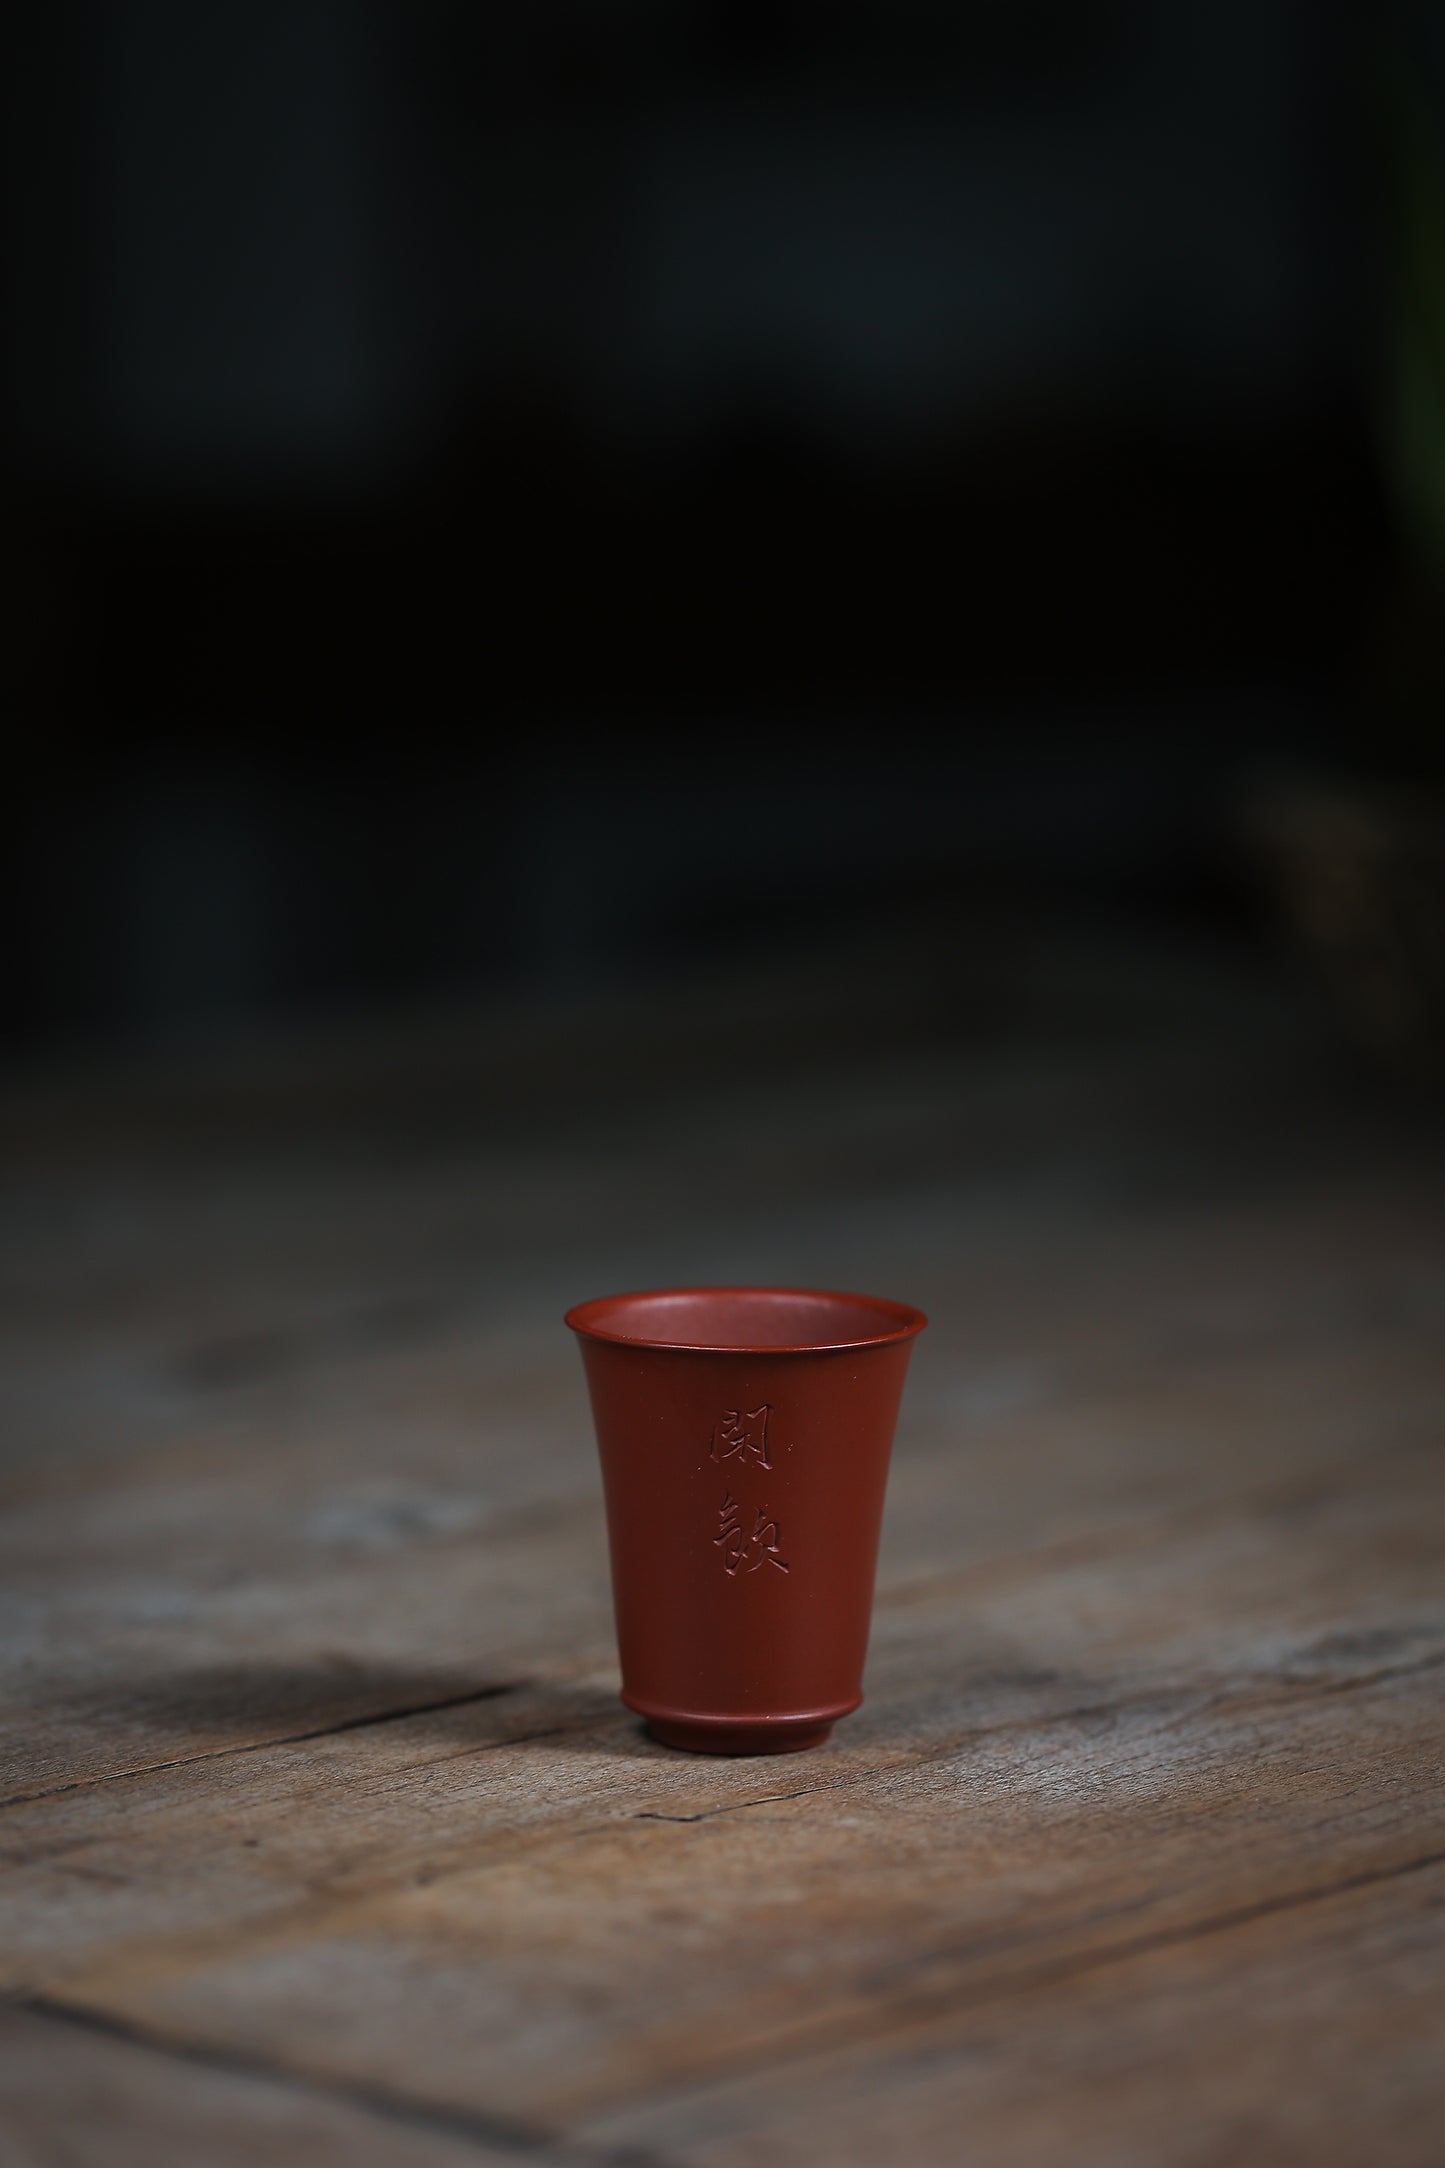 Red clay smelling cup